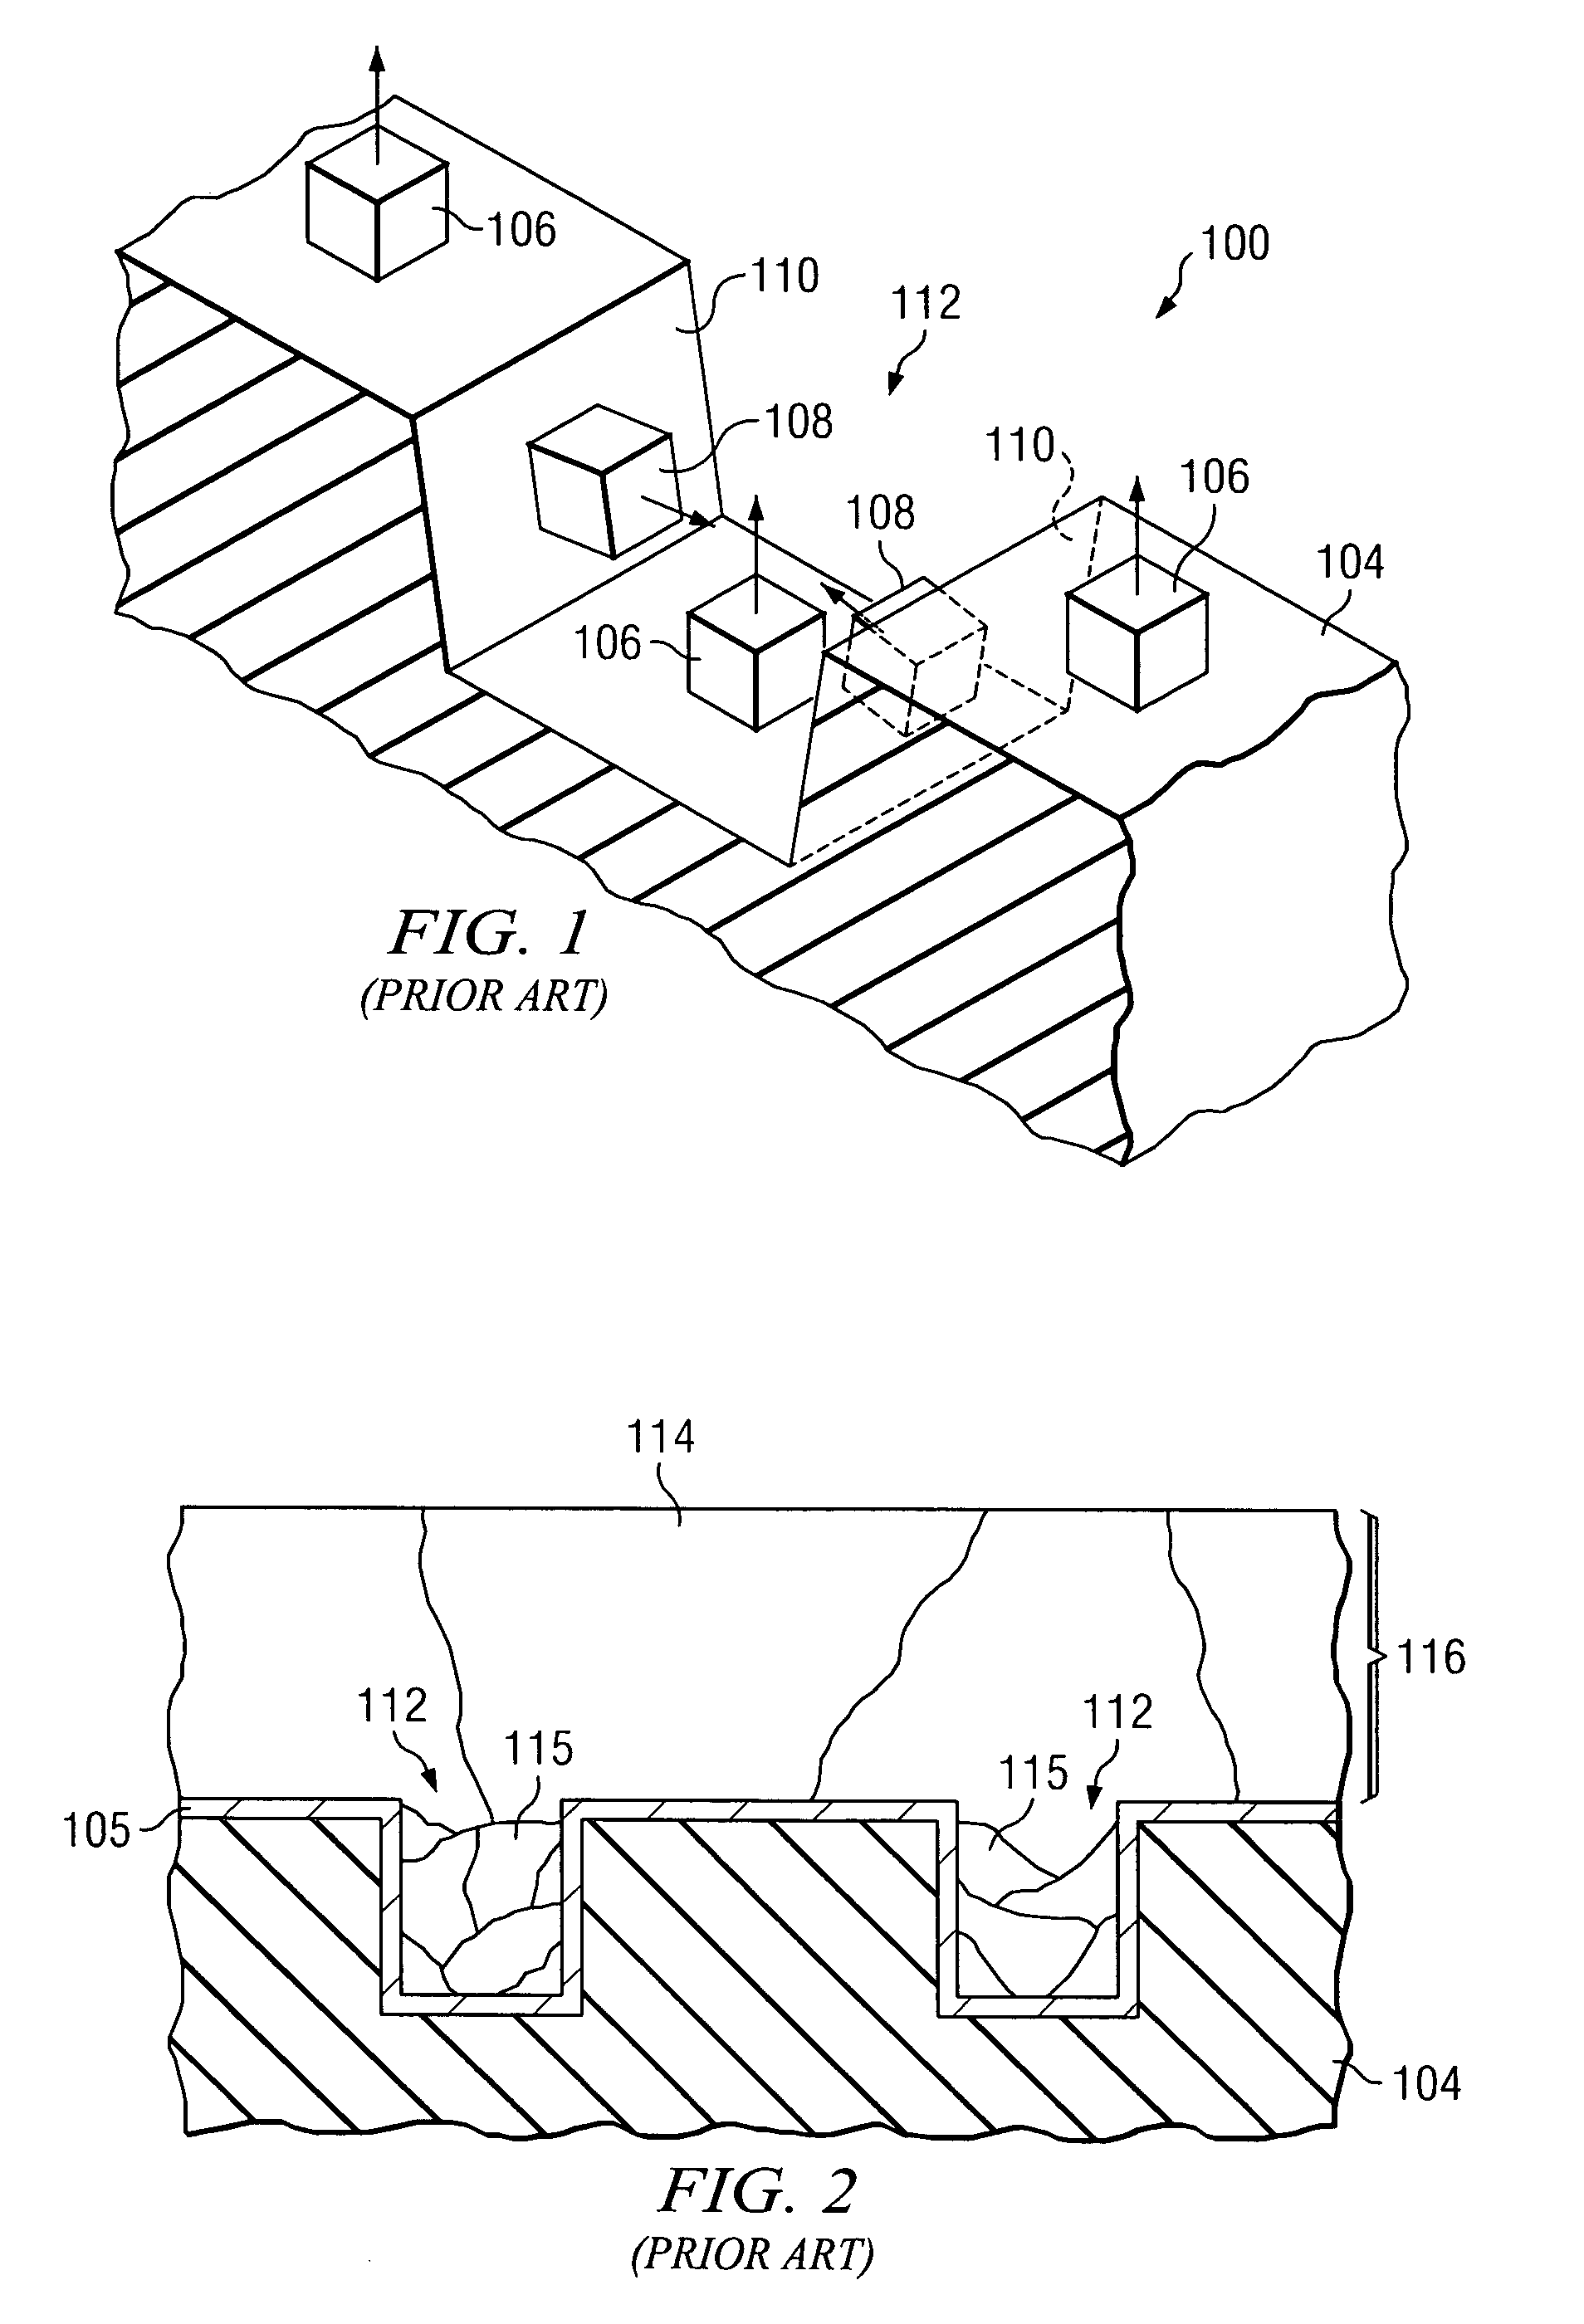 Barrier layer for conductive features